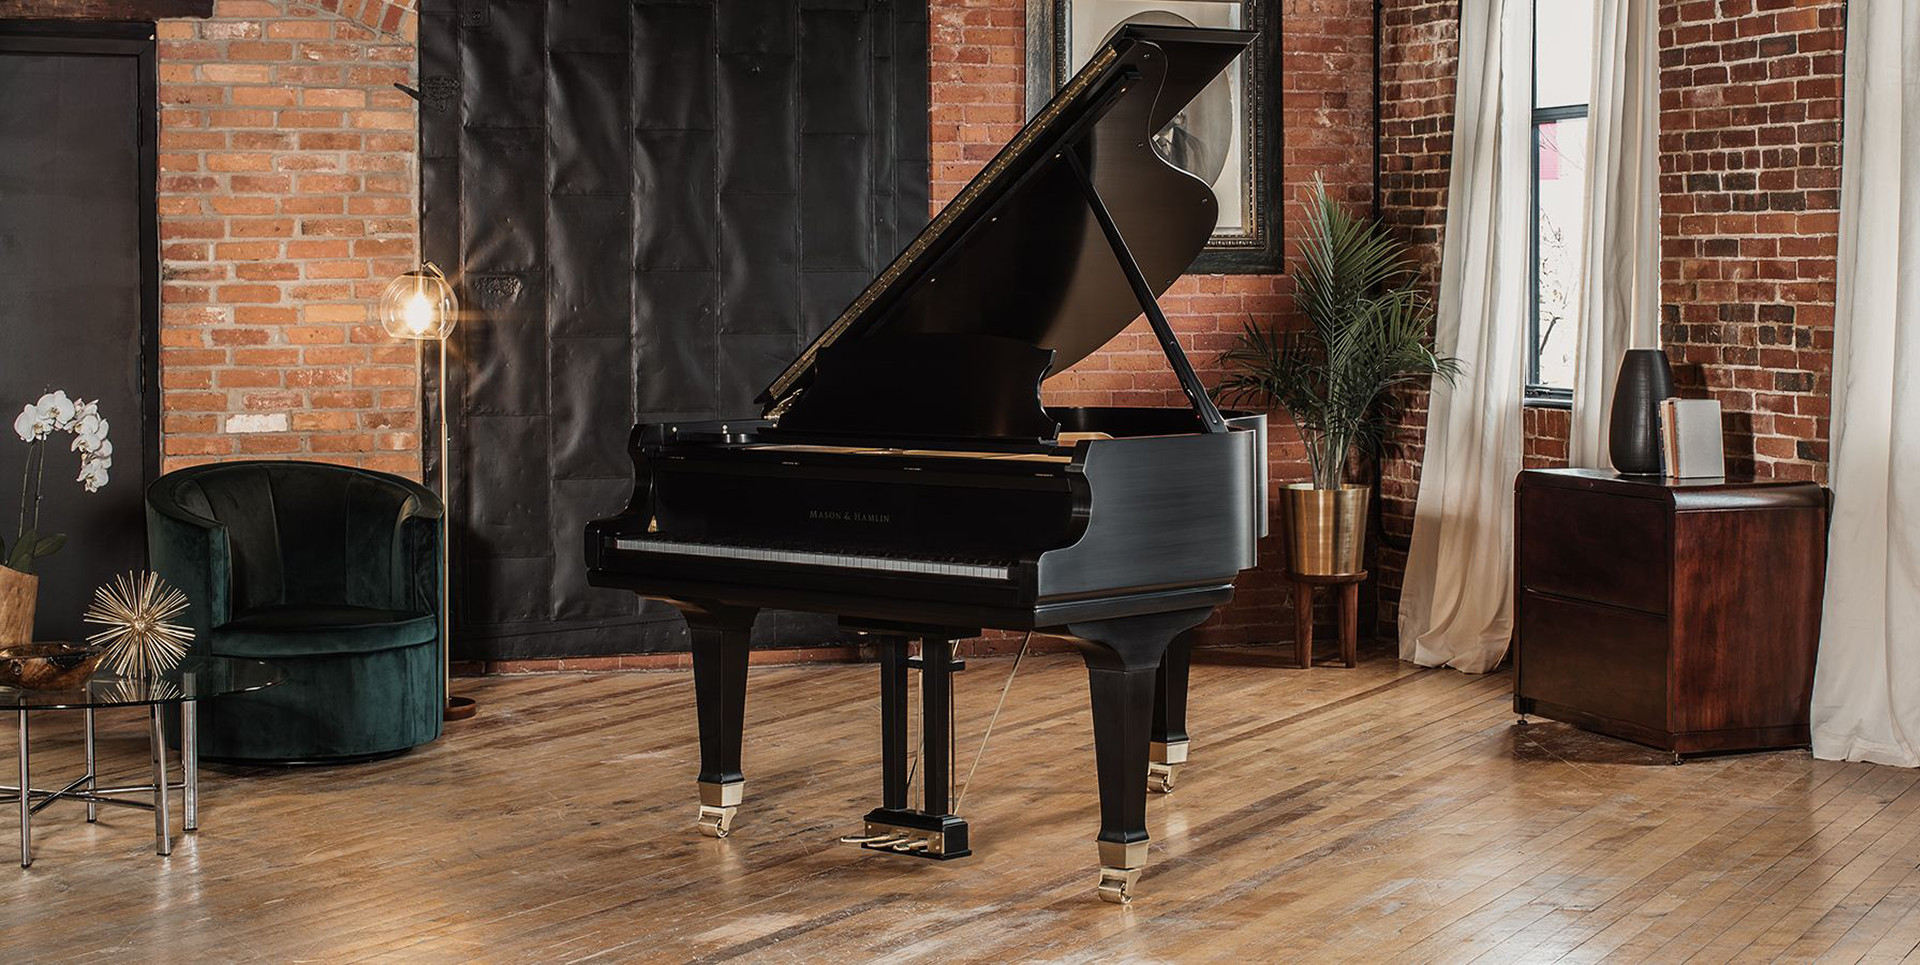 Let Us Find you The Perfect Piano at Michelles Piano in Portland OR